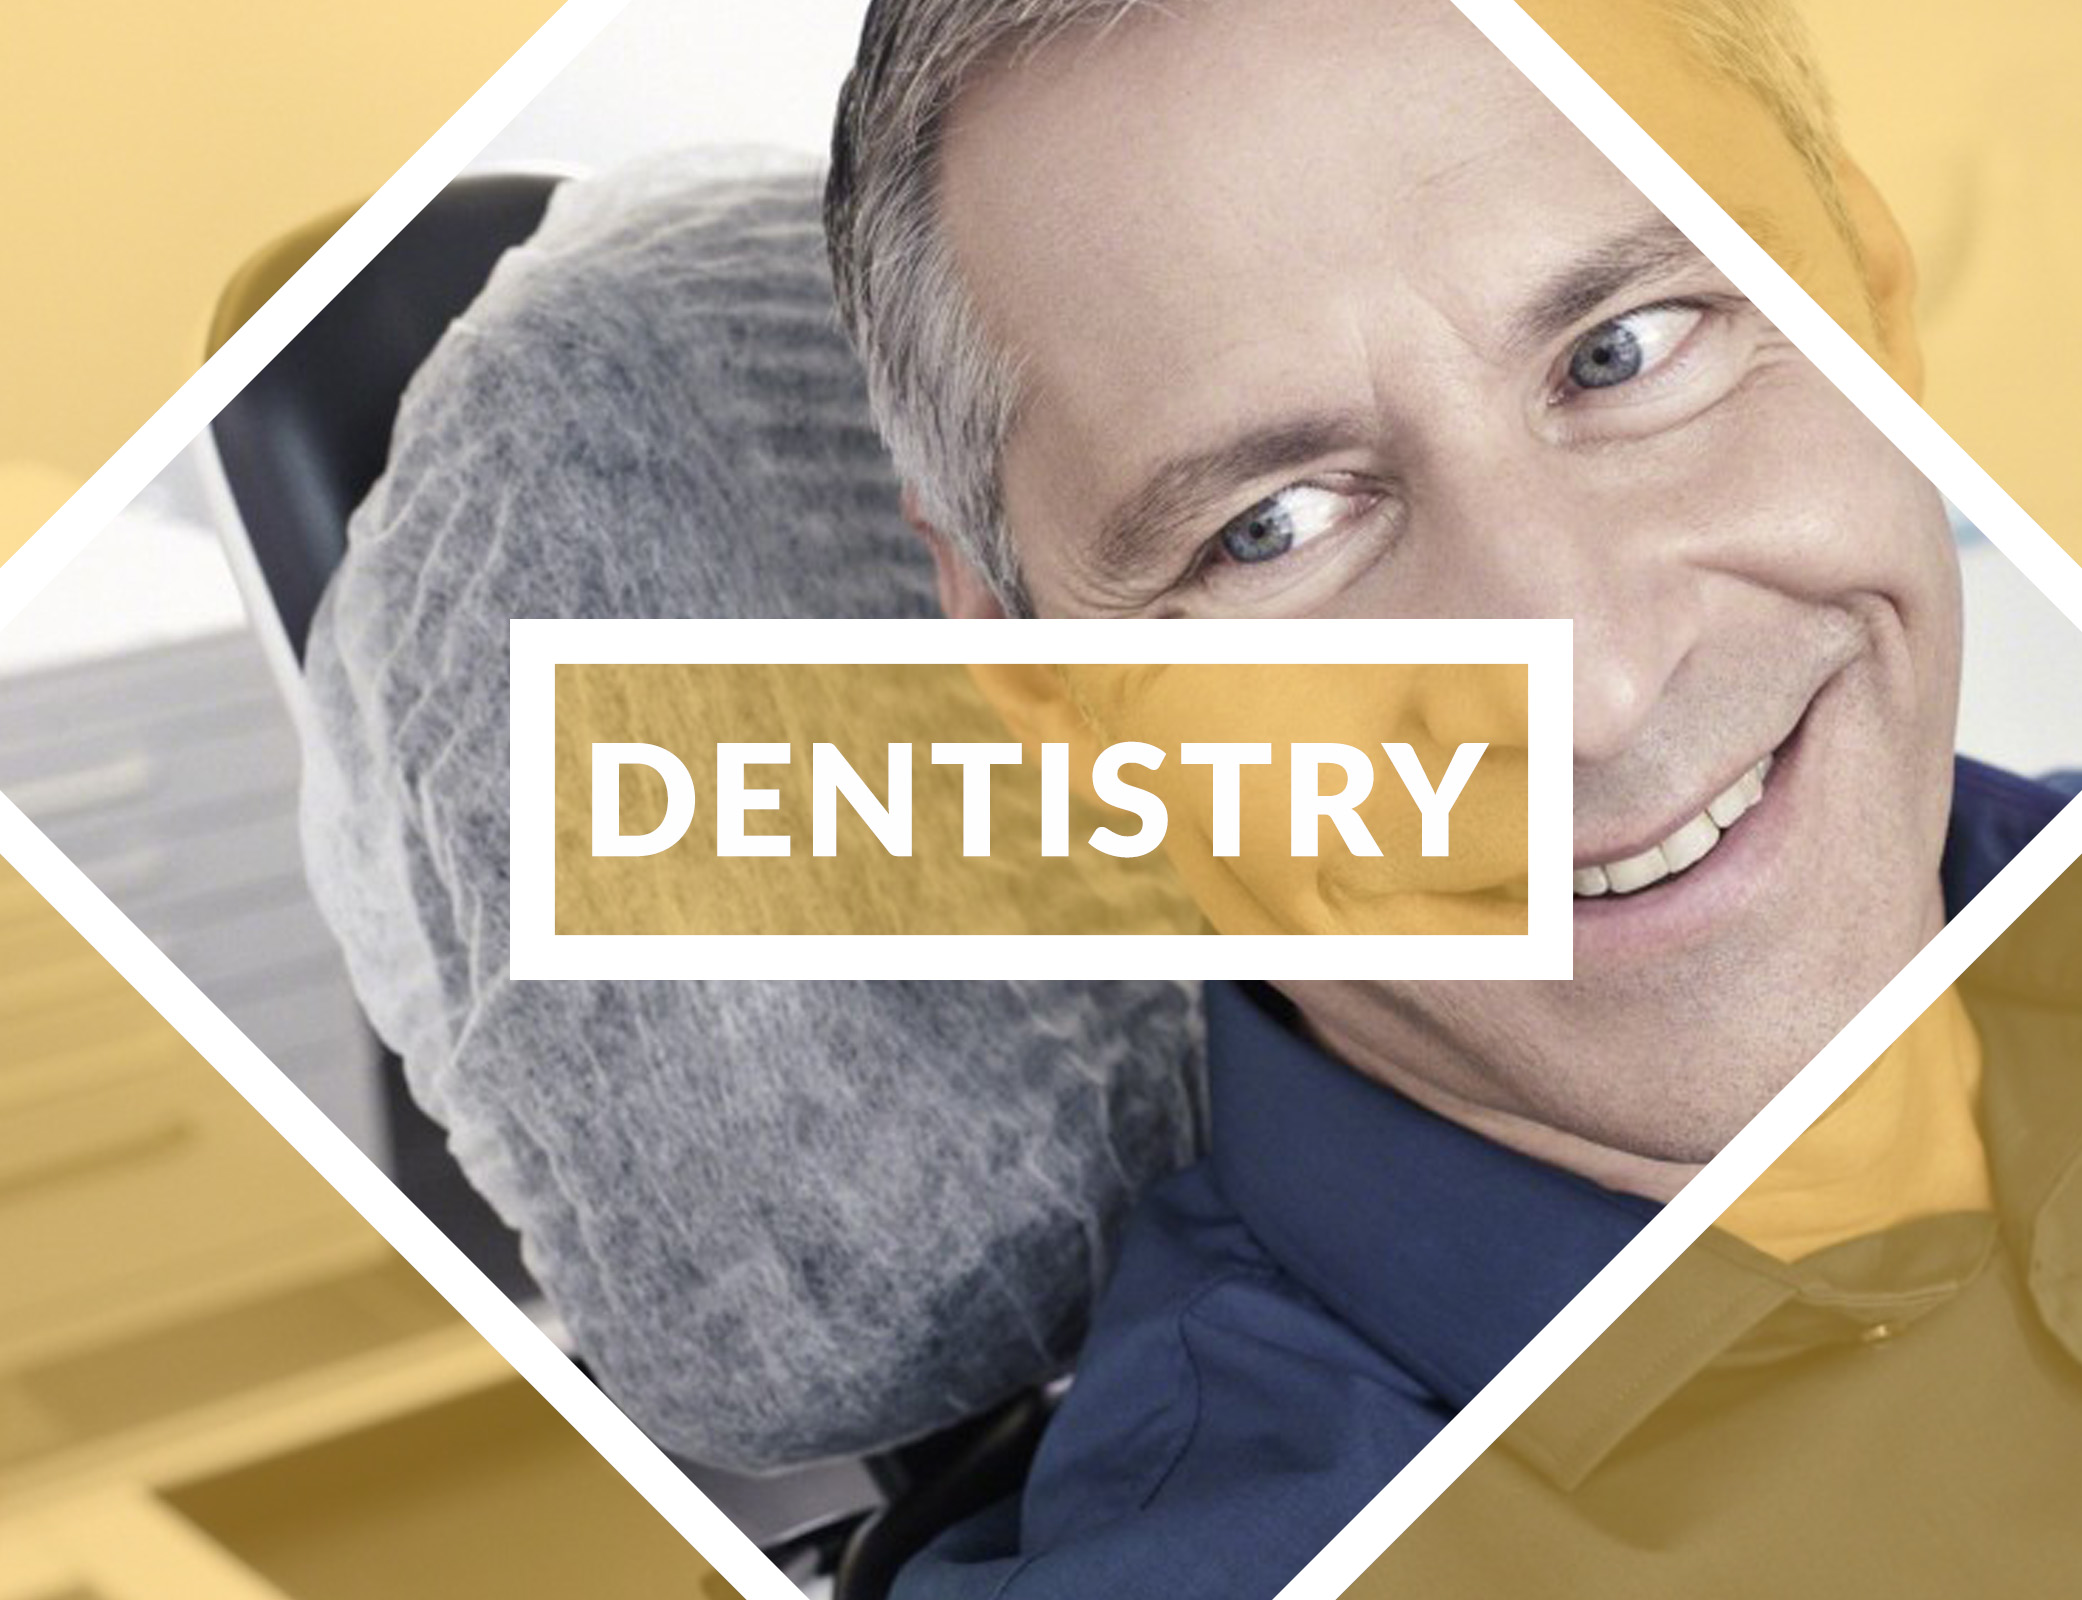 DENTISTRY SERVICES